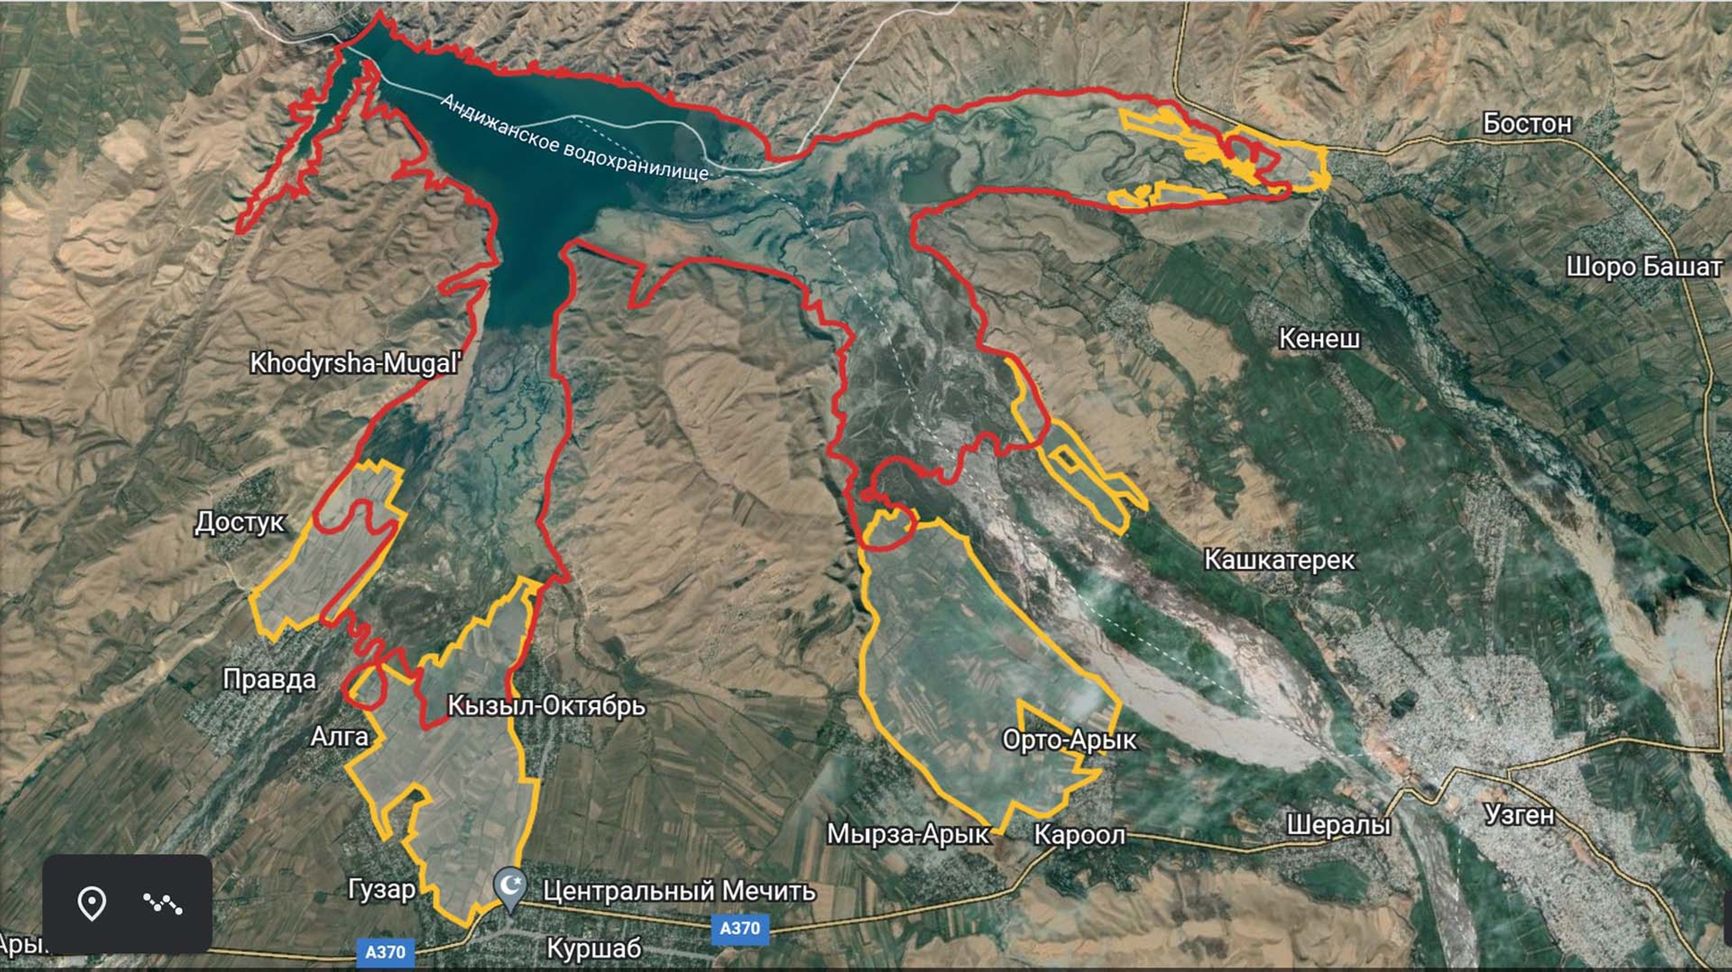 The 900th horizontal line (marked in red) overlapping the fields at the mouths of three rivers - Kurshab (left), Kara-Darya (center), and Zhazy (top right). Nearby fields of locals are marked in yellow kloop.kg